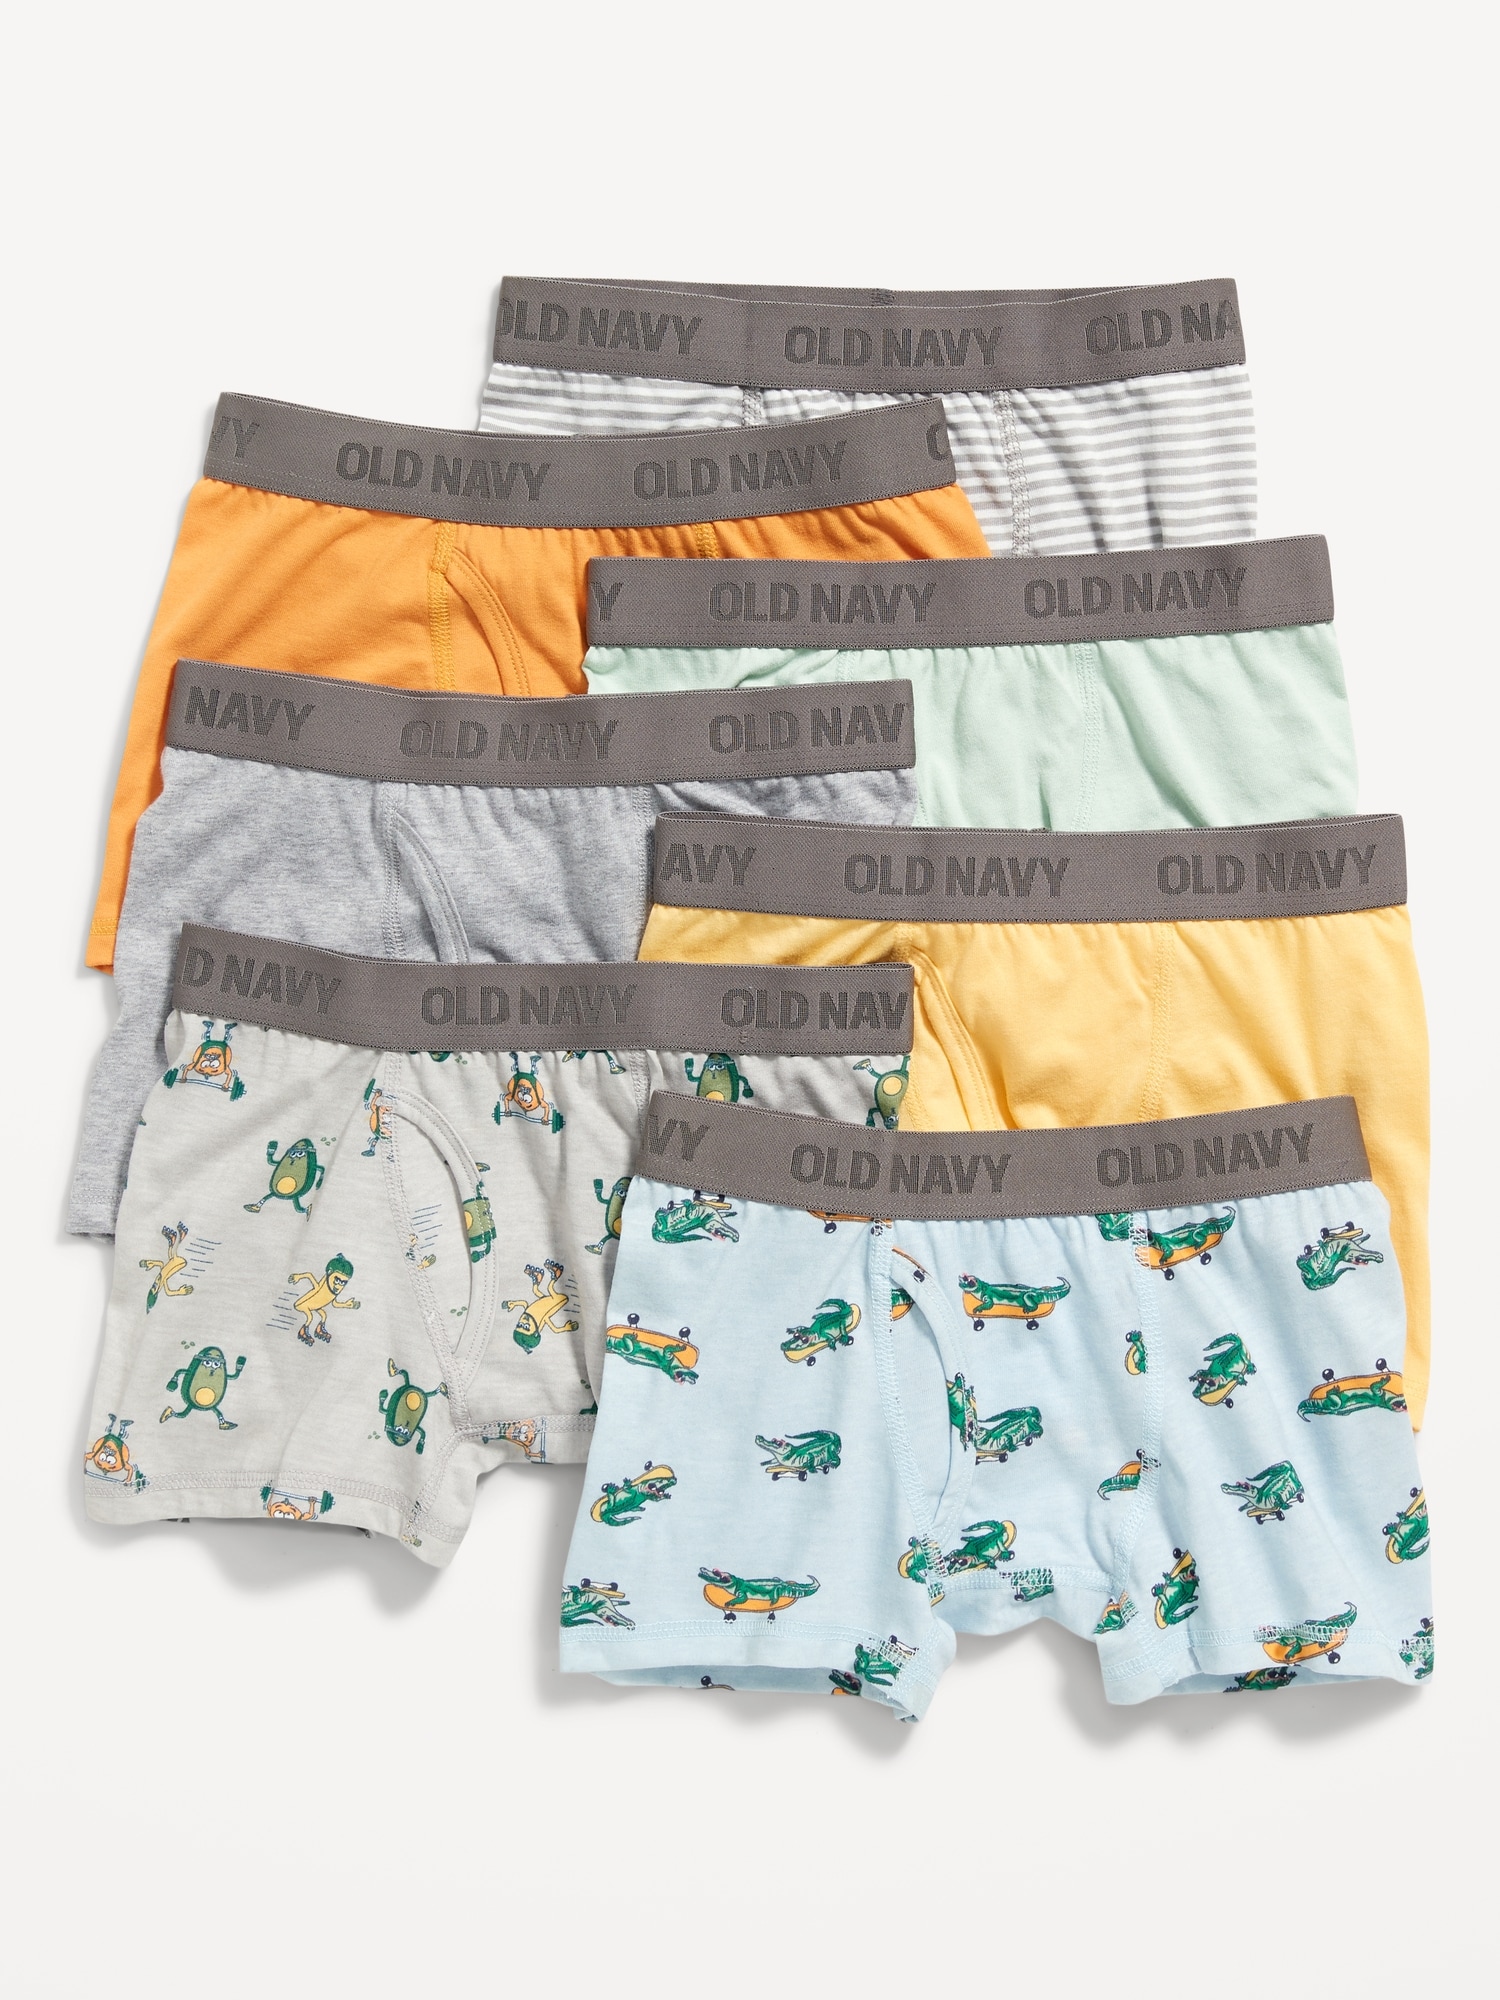 Old Navy Printed Boxer-Briefs Underwear 7-Pack for Boys multi. 1